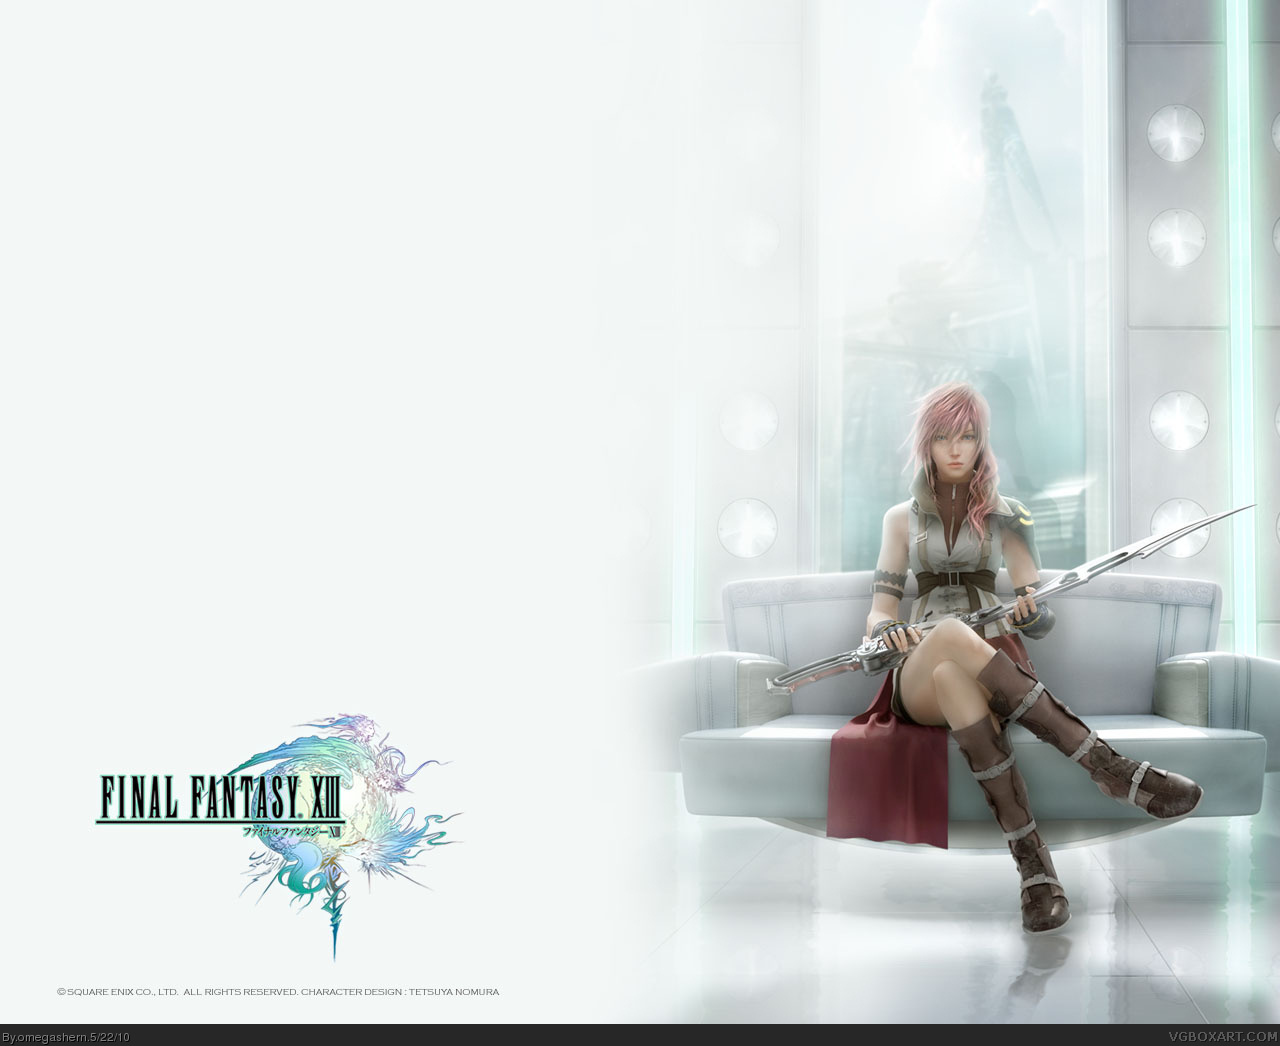 Final Fantasy XIII: Limited Edition box cover